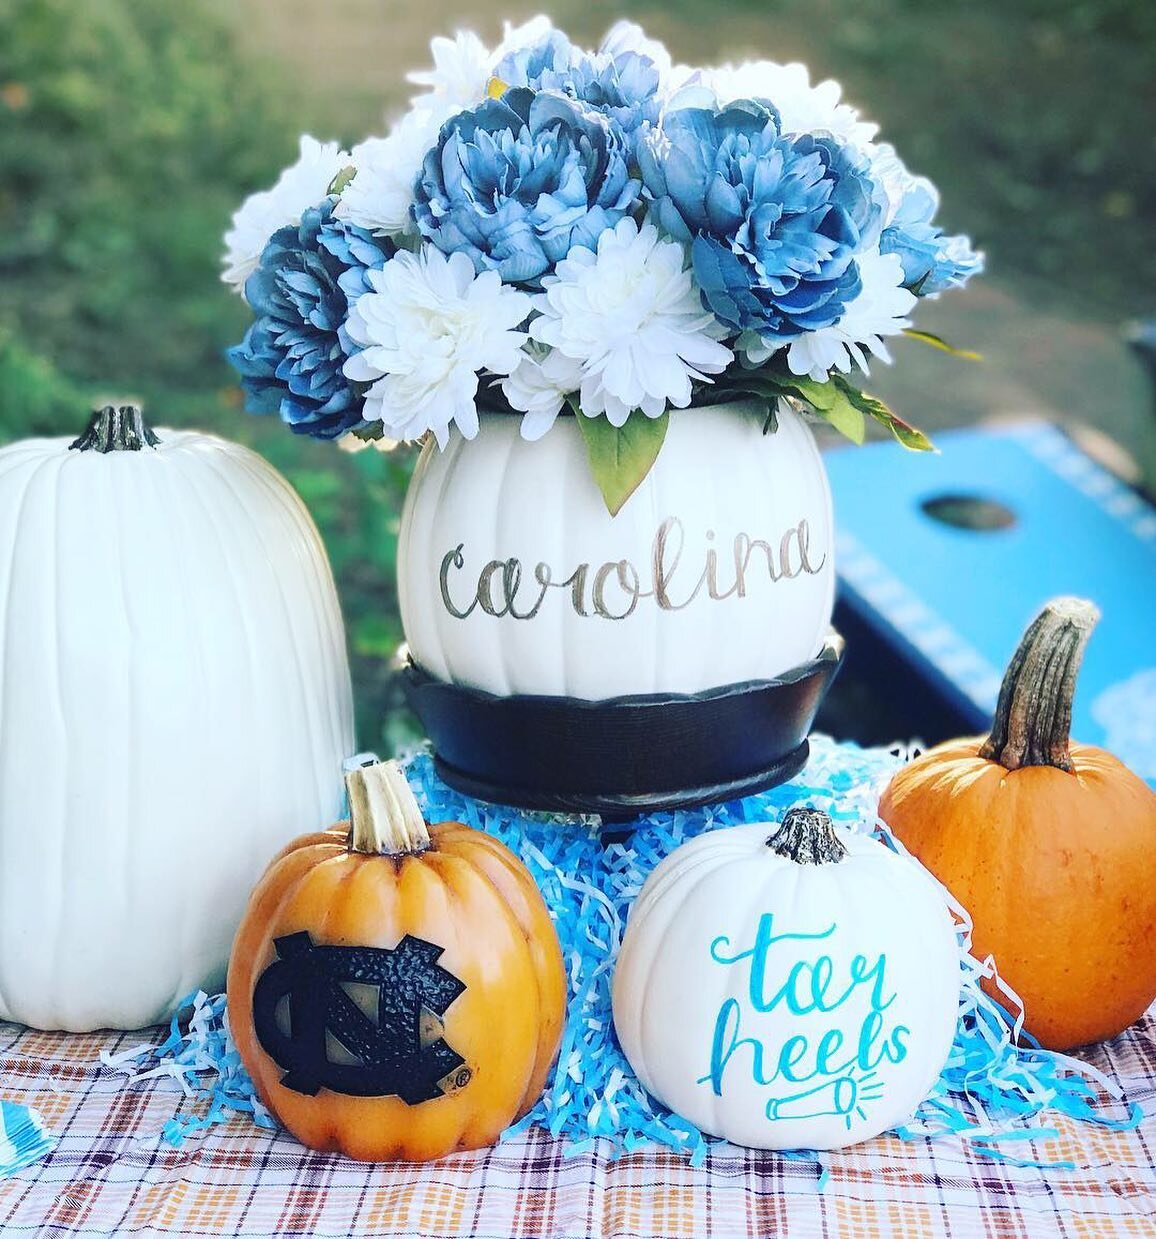 It&rsquo;s game day Tar Heels! 💙🐏🏈 Pretty sad I&rsquo;m not showing up to the tailgate with a trunk full of pumpkins and autumn decor (ya know, the usual tailgate supplies 😅), lots of yummy tailgate food, and Blue Moons, or even catching updates 